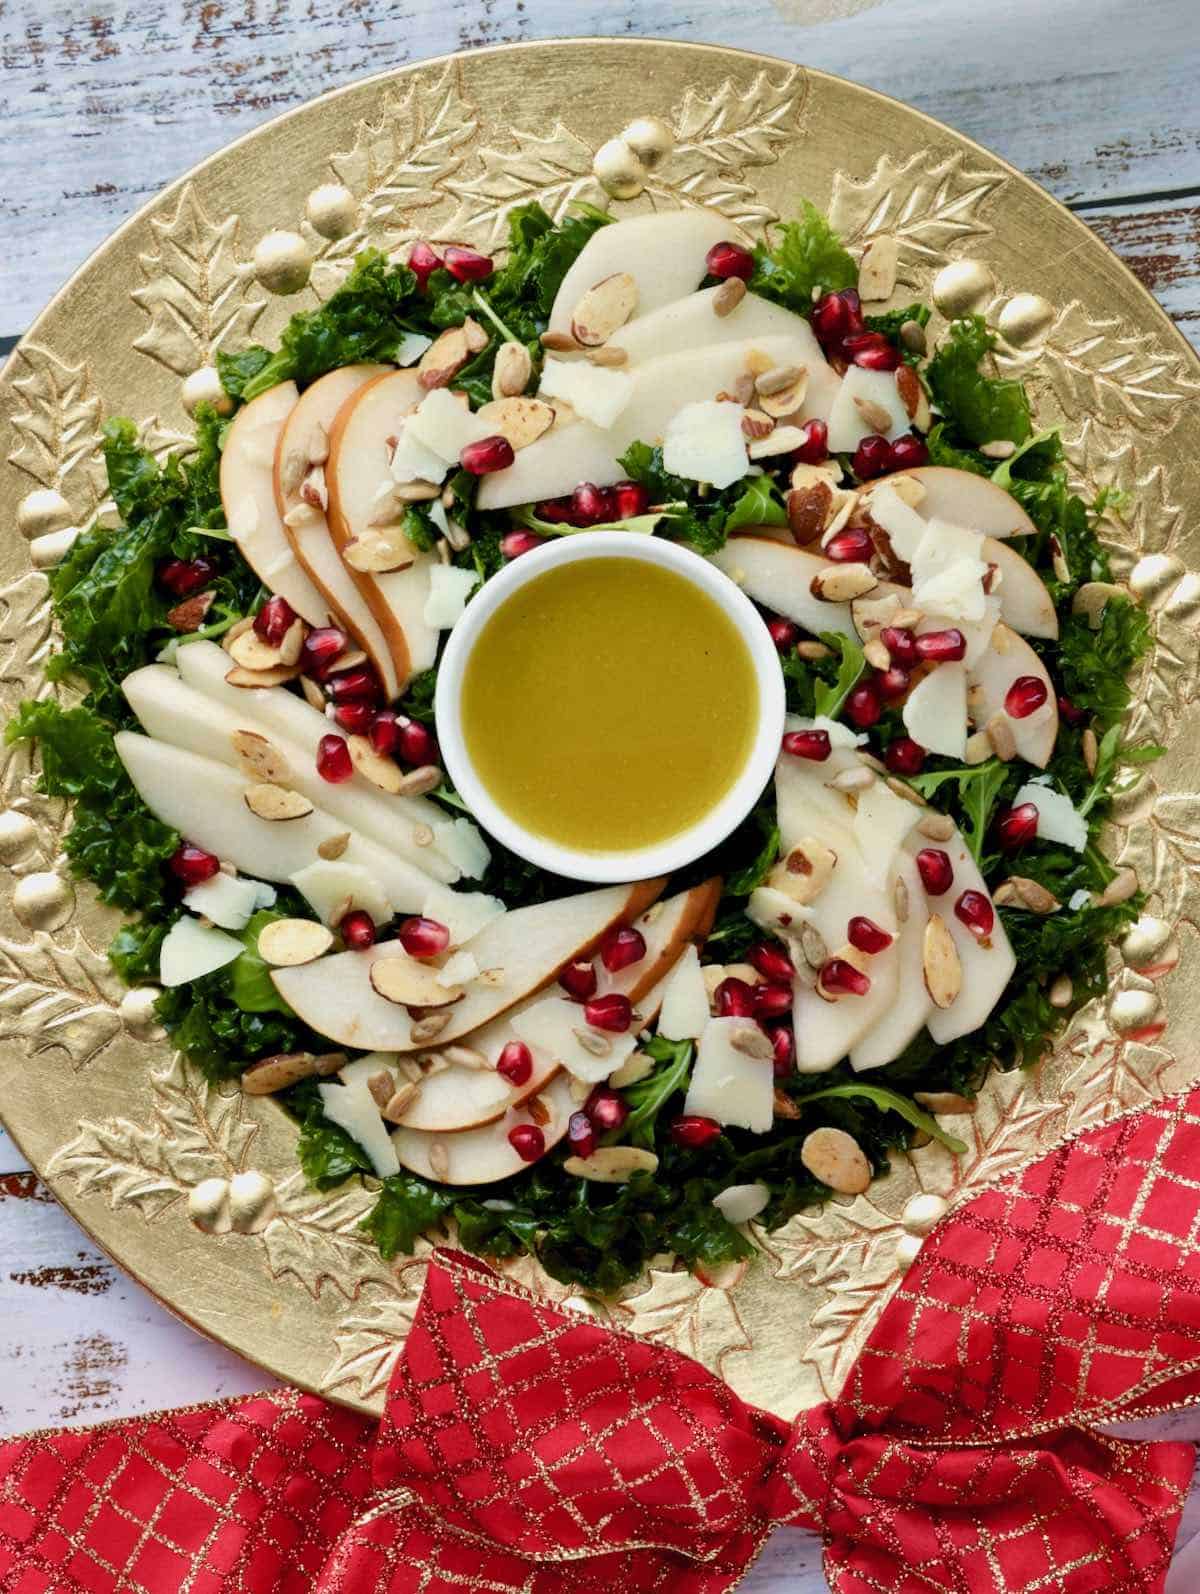 Pear salad on gold platter with red bow.